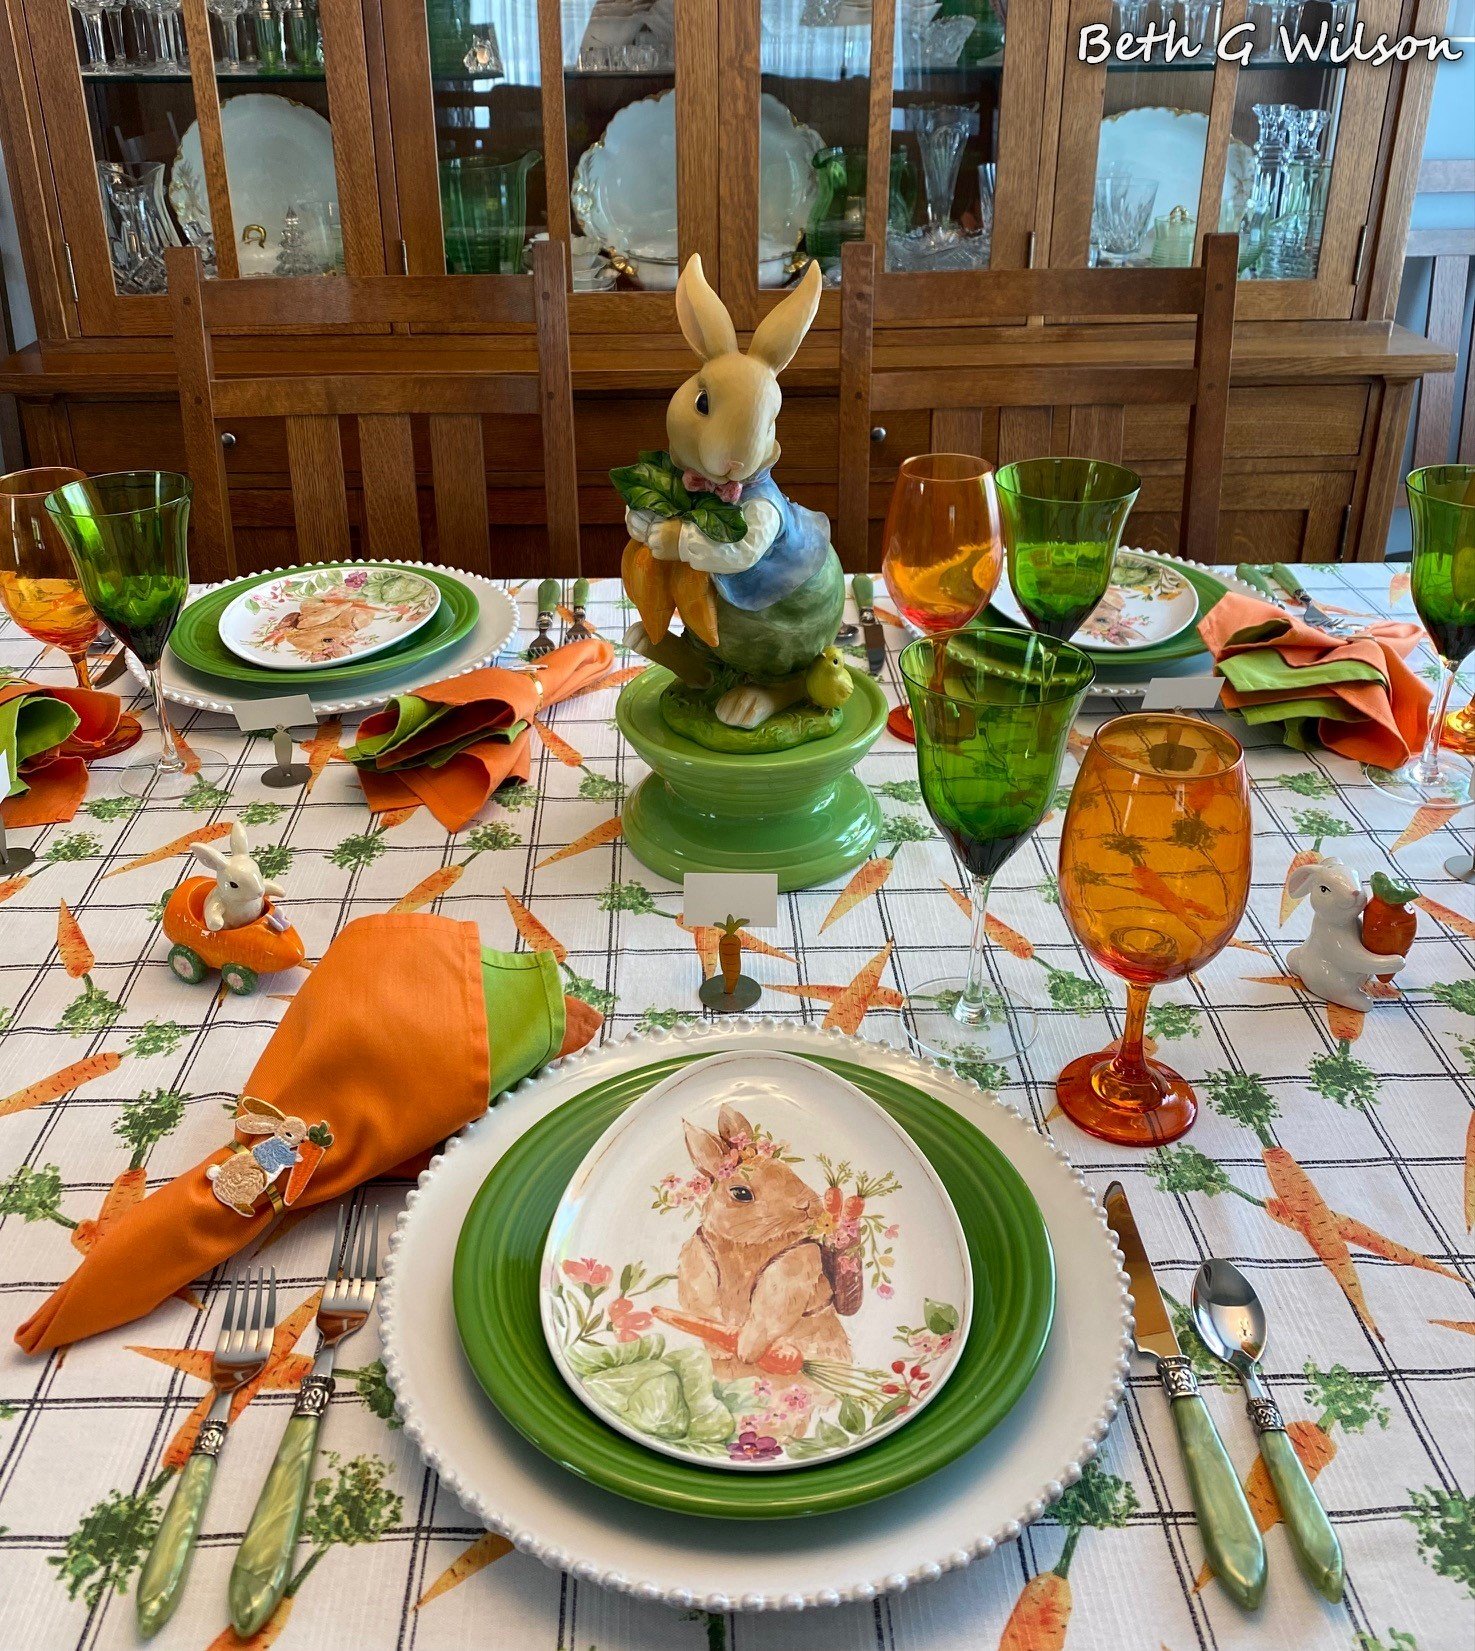 Dining Delight: Bunnies and Carrots Easter Decor